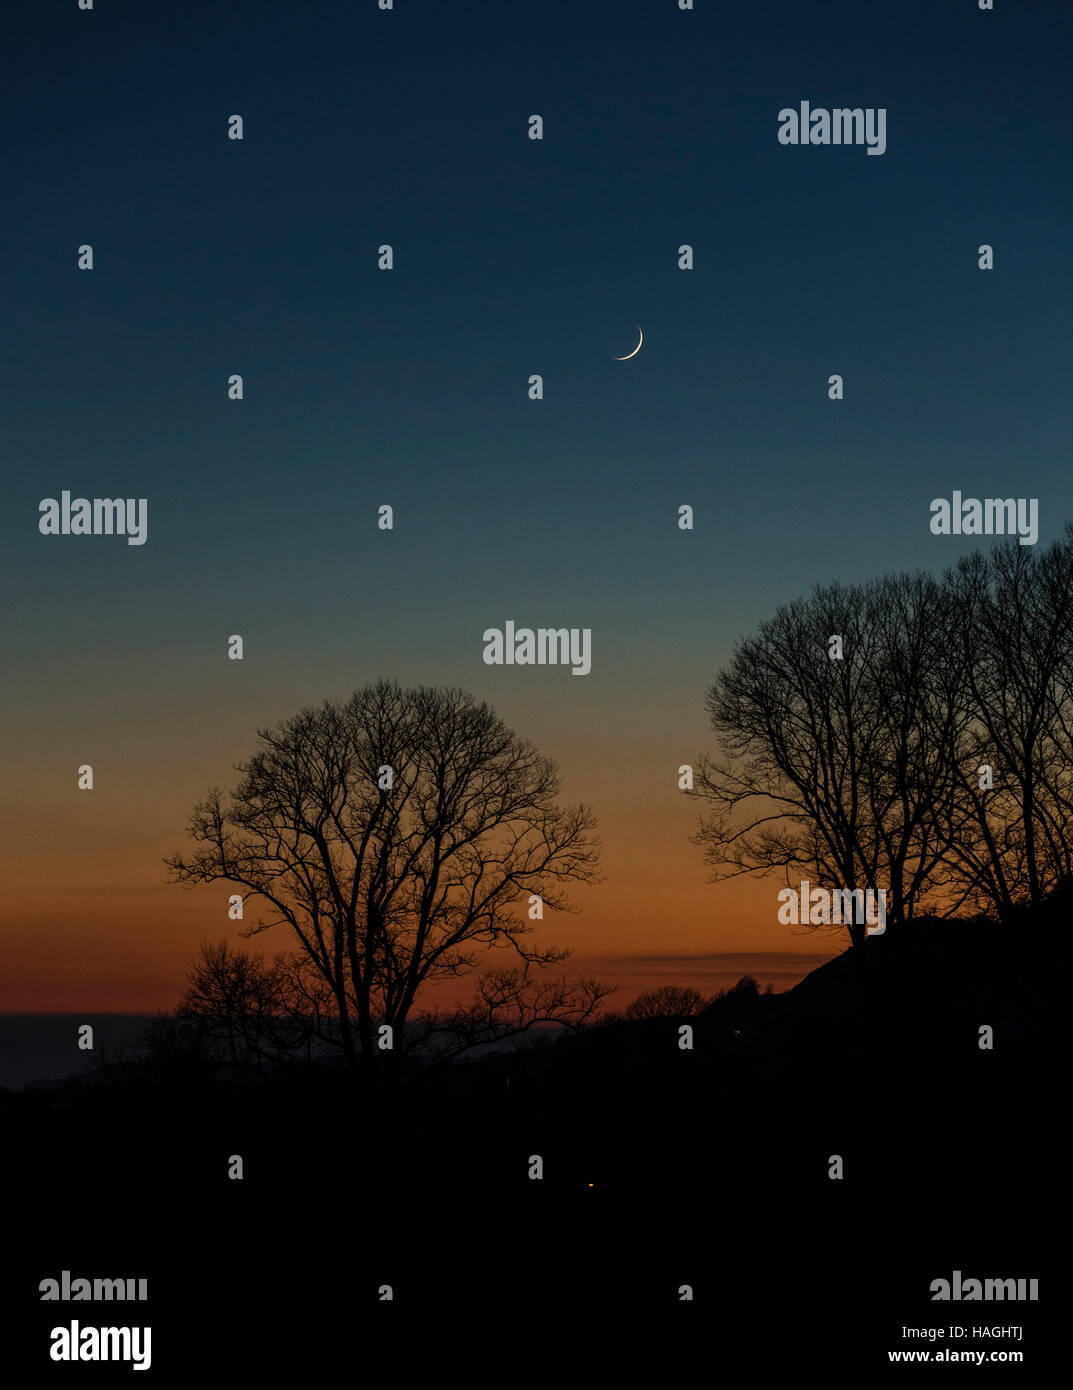 Sidmouth, Devon, 1st Dec 2016 A new crescent moon rises above the English Channel at Sidmouth Devon, at the end of a clear and frosty winter's day throughout the South West of England. Photo: Tony Charnock / Alamy Live News Stock Photo